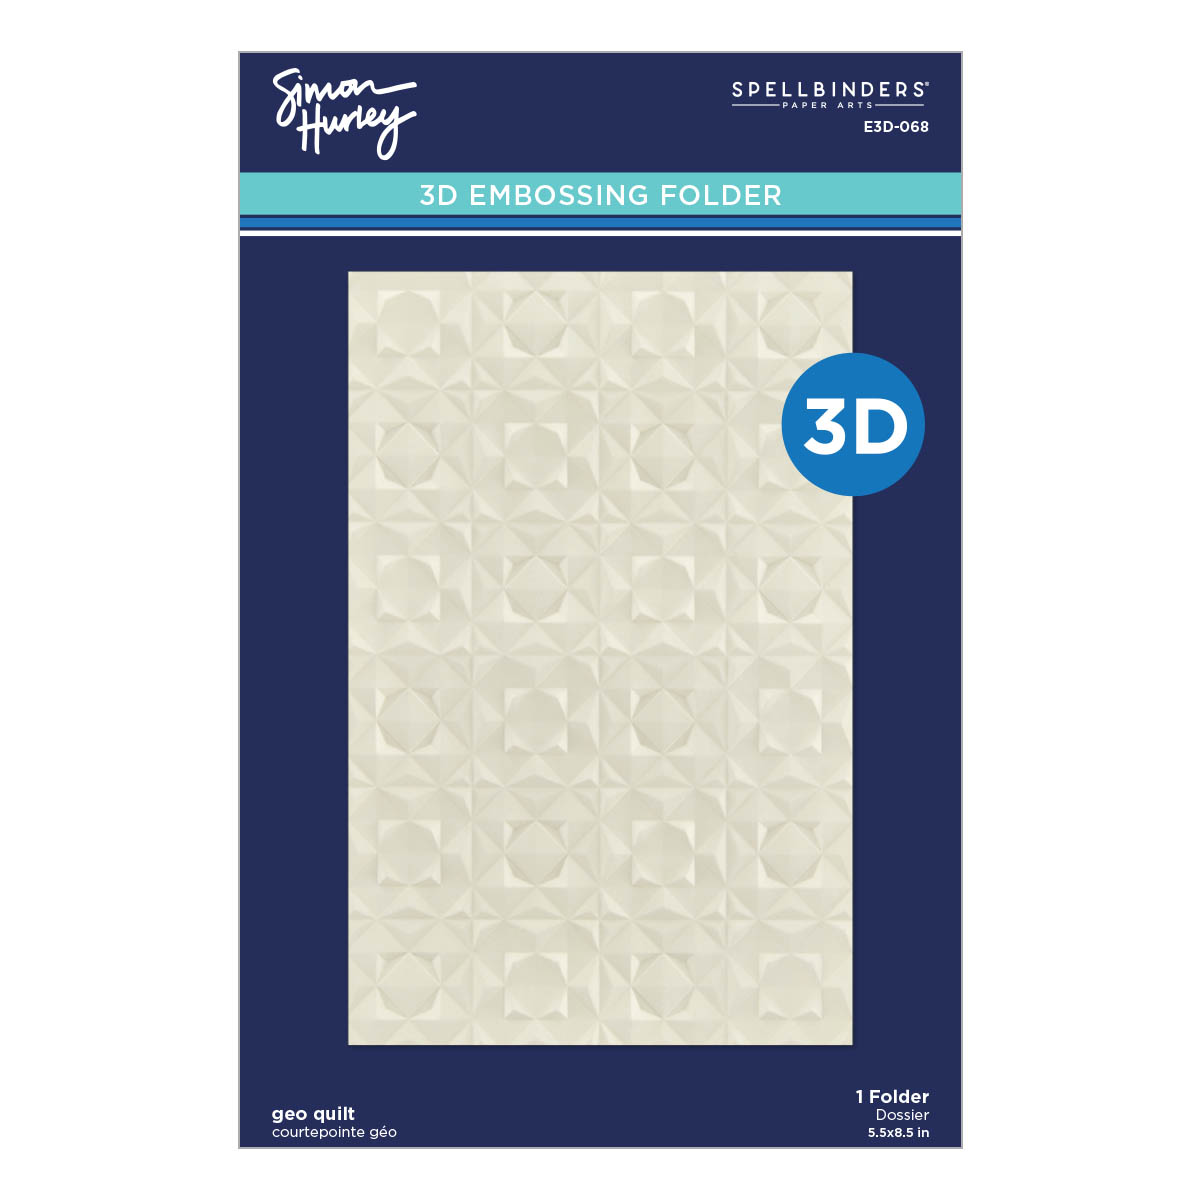 Spellbbinders Geo Quilt 3D Embossing Folder From the Simon’s Snow Globes Collection By Simon Hurley